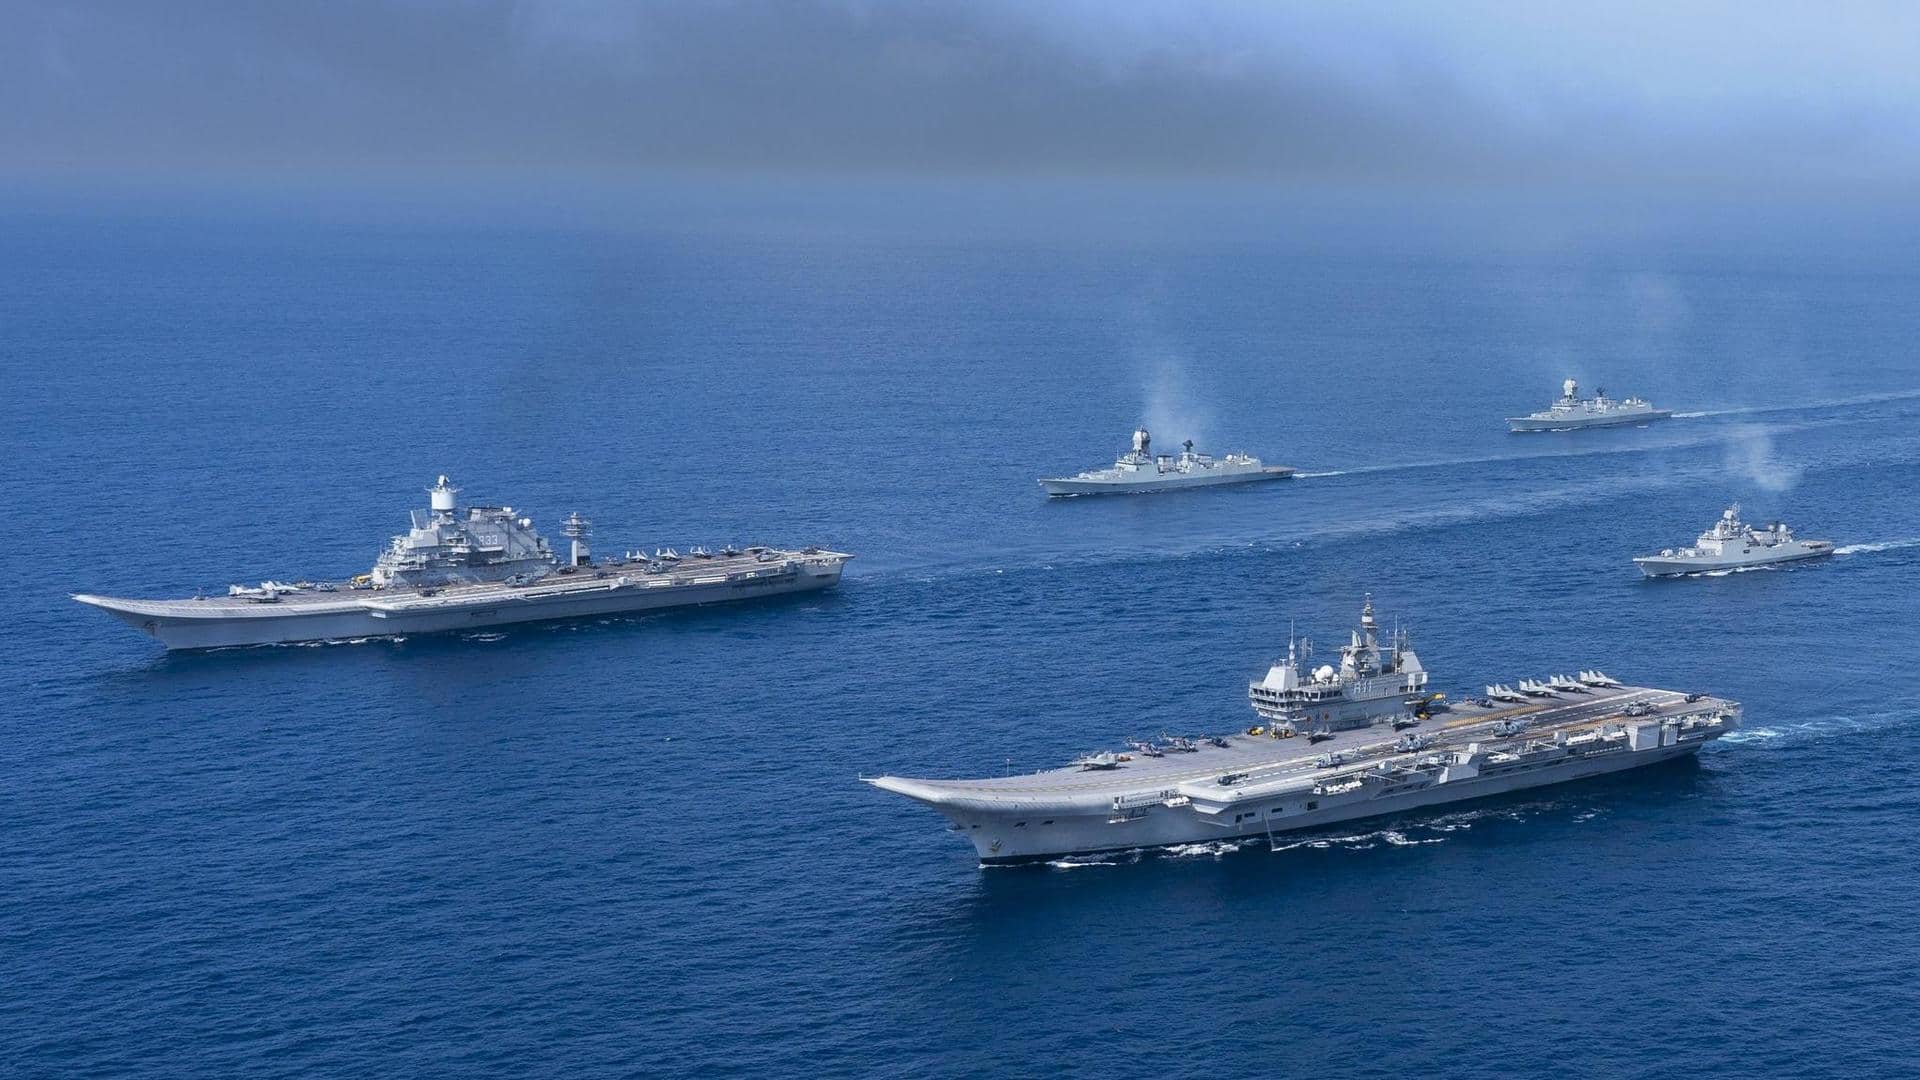 35 fighter jets, aircraft carriers, submarines: Indian Navy's mega drill